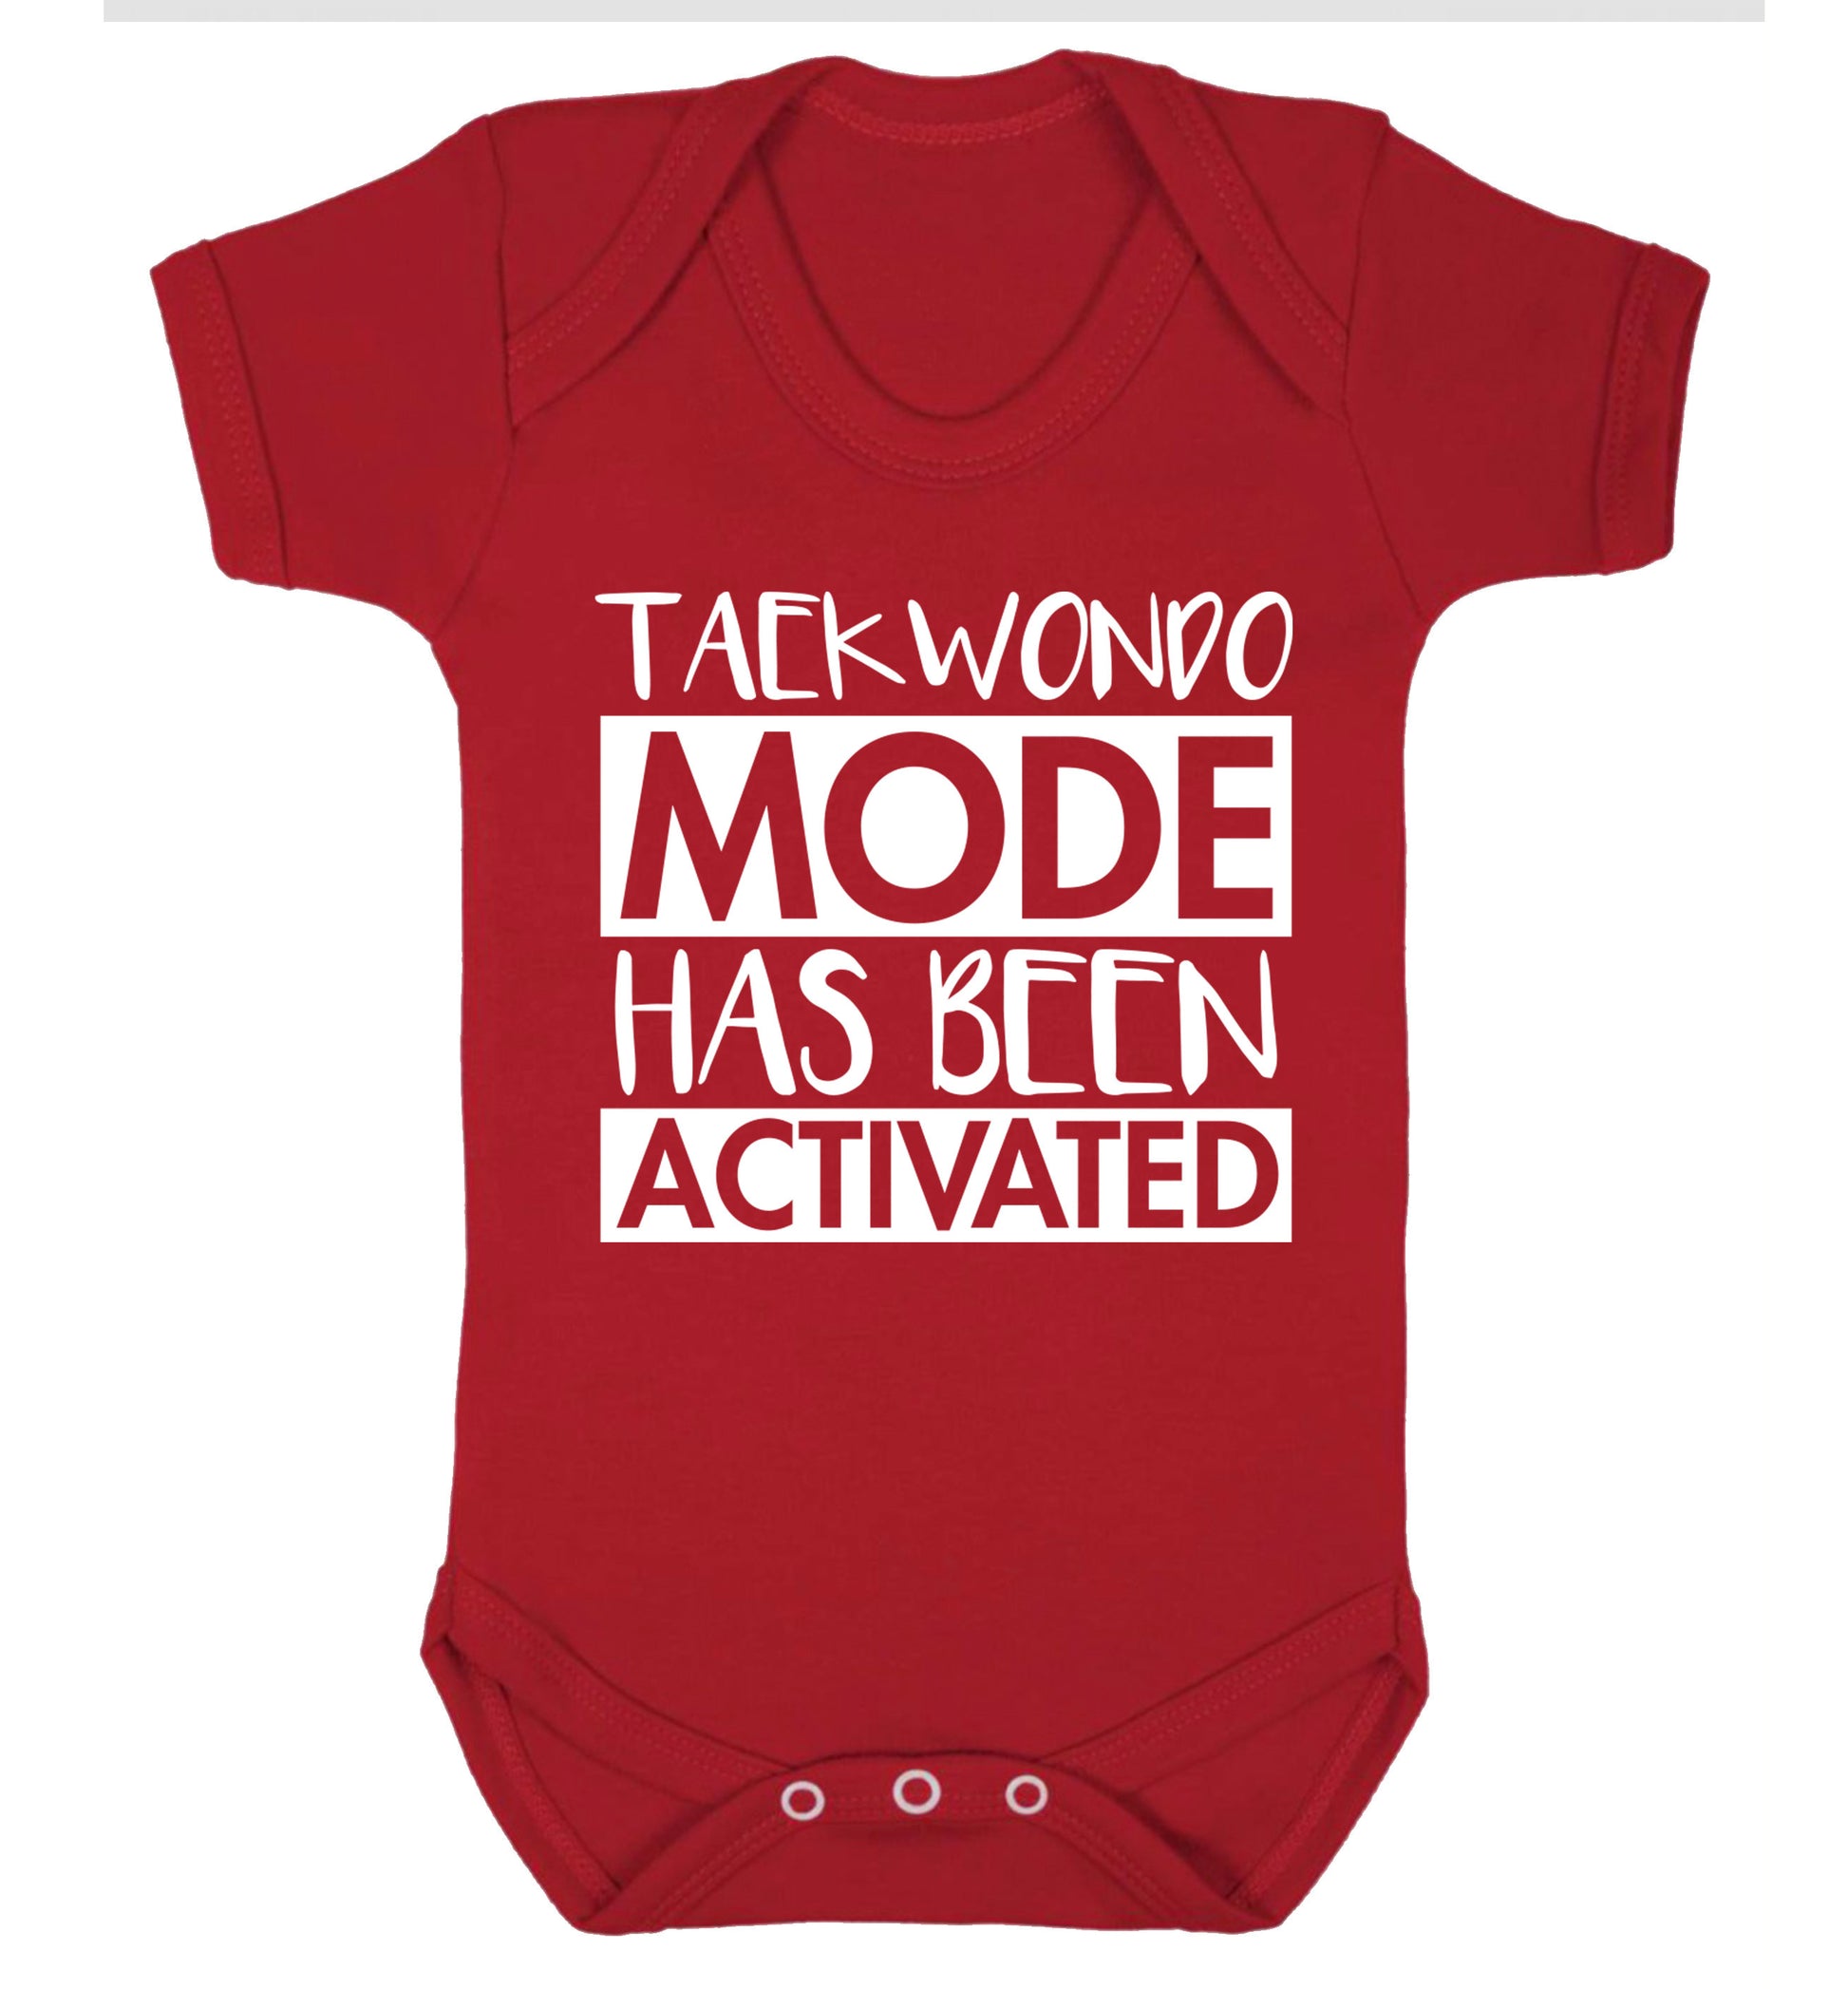 Taekwondo mode activated Baby Vest red 18-24 months